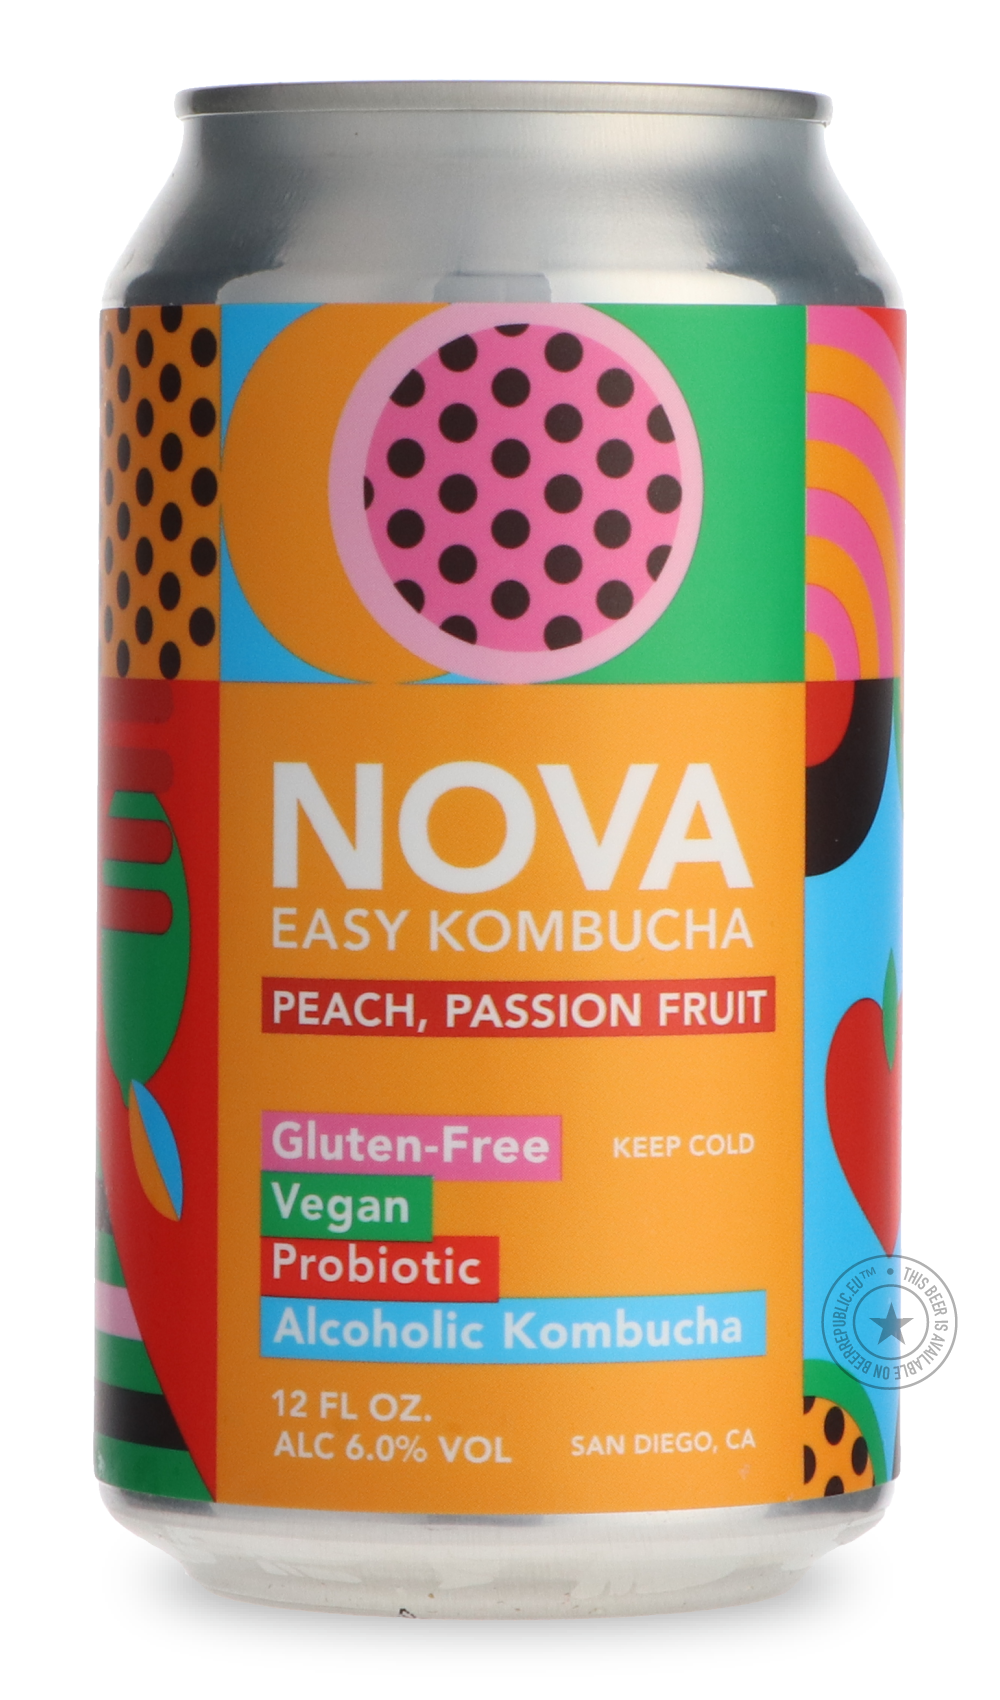 -Novo Brazil- NOVA Kombucha Peach, Passion Fruit-Specials- Only @ Beer Republic - The best online beer store for American & Canadian craft beer - Buy beer online from the USA and Canada - Bier online kopen - Amerikaans bier kopen - Craft beer store - Craft beer kopen - Amerikanisch bier kaufen - Bier online kaufen - Acheter biere online - IPA - Stout - Porter - New England IPA - Hazy IPA - Imperial Stout - Barrel Aged - Barrel Aged Imperial Stout - Brown - Dark beer - Blond - Blonde - Pilsner - Lager - Whea